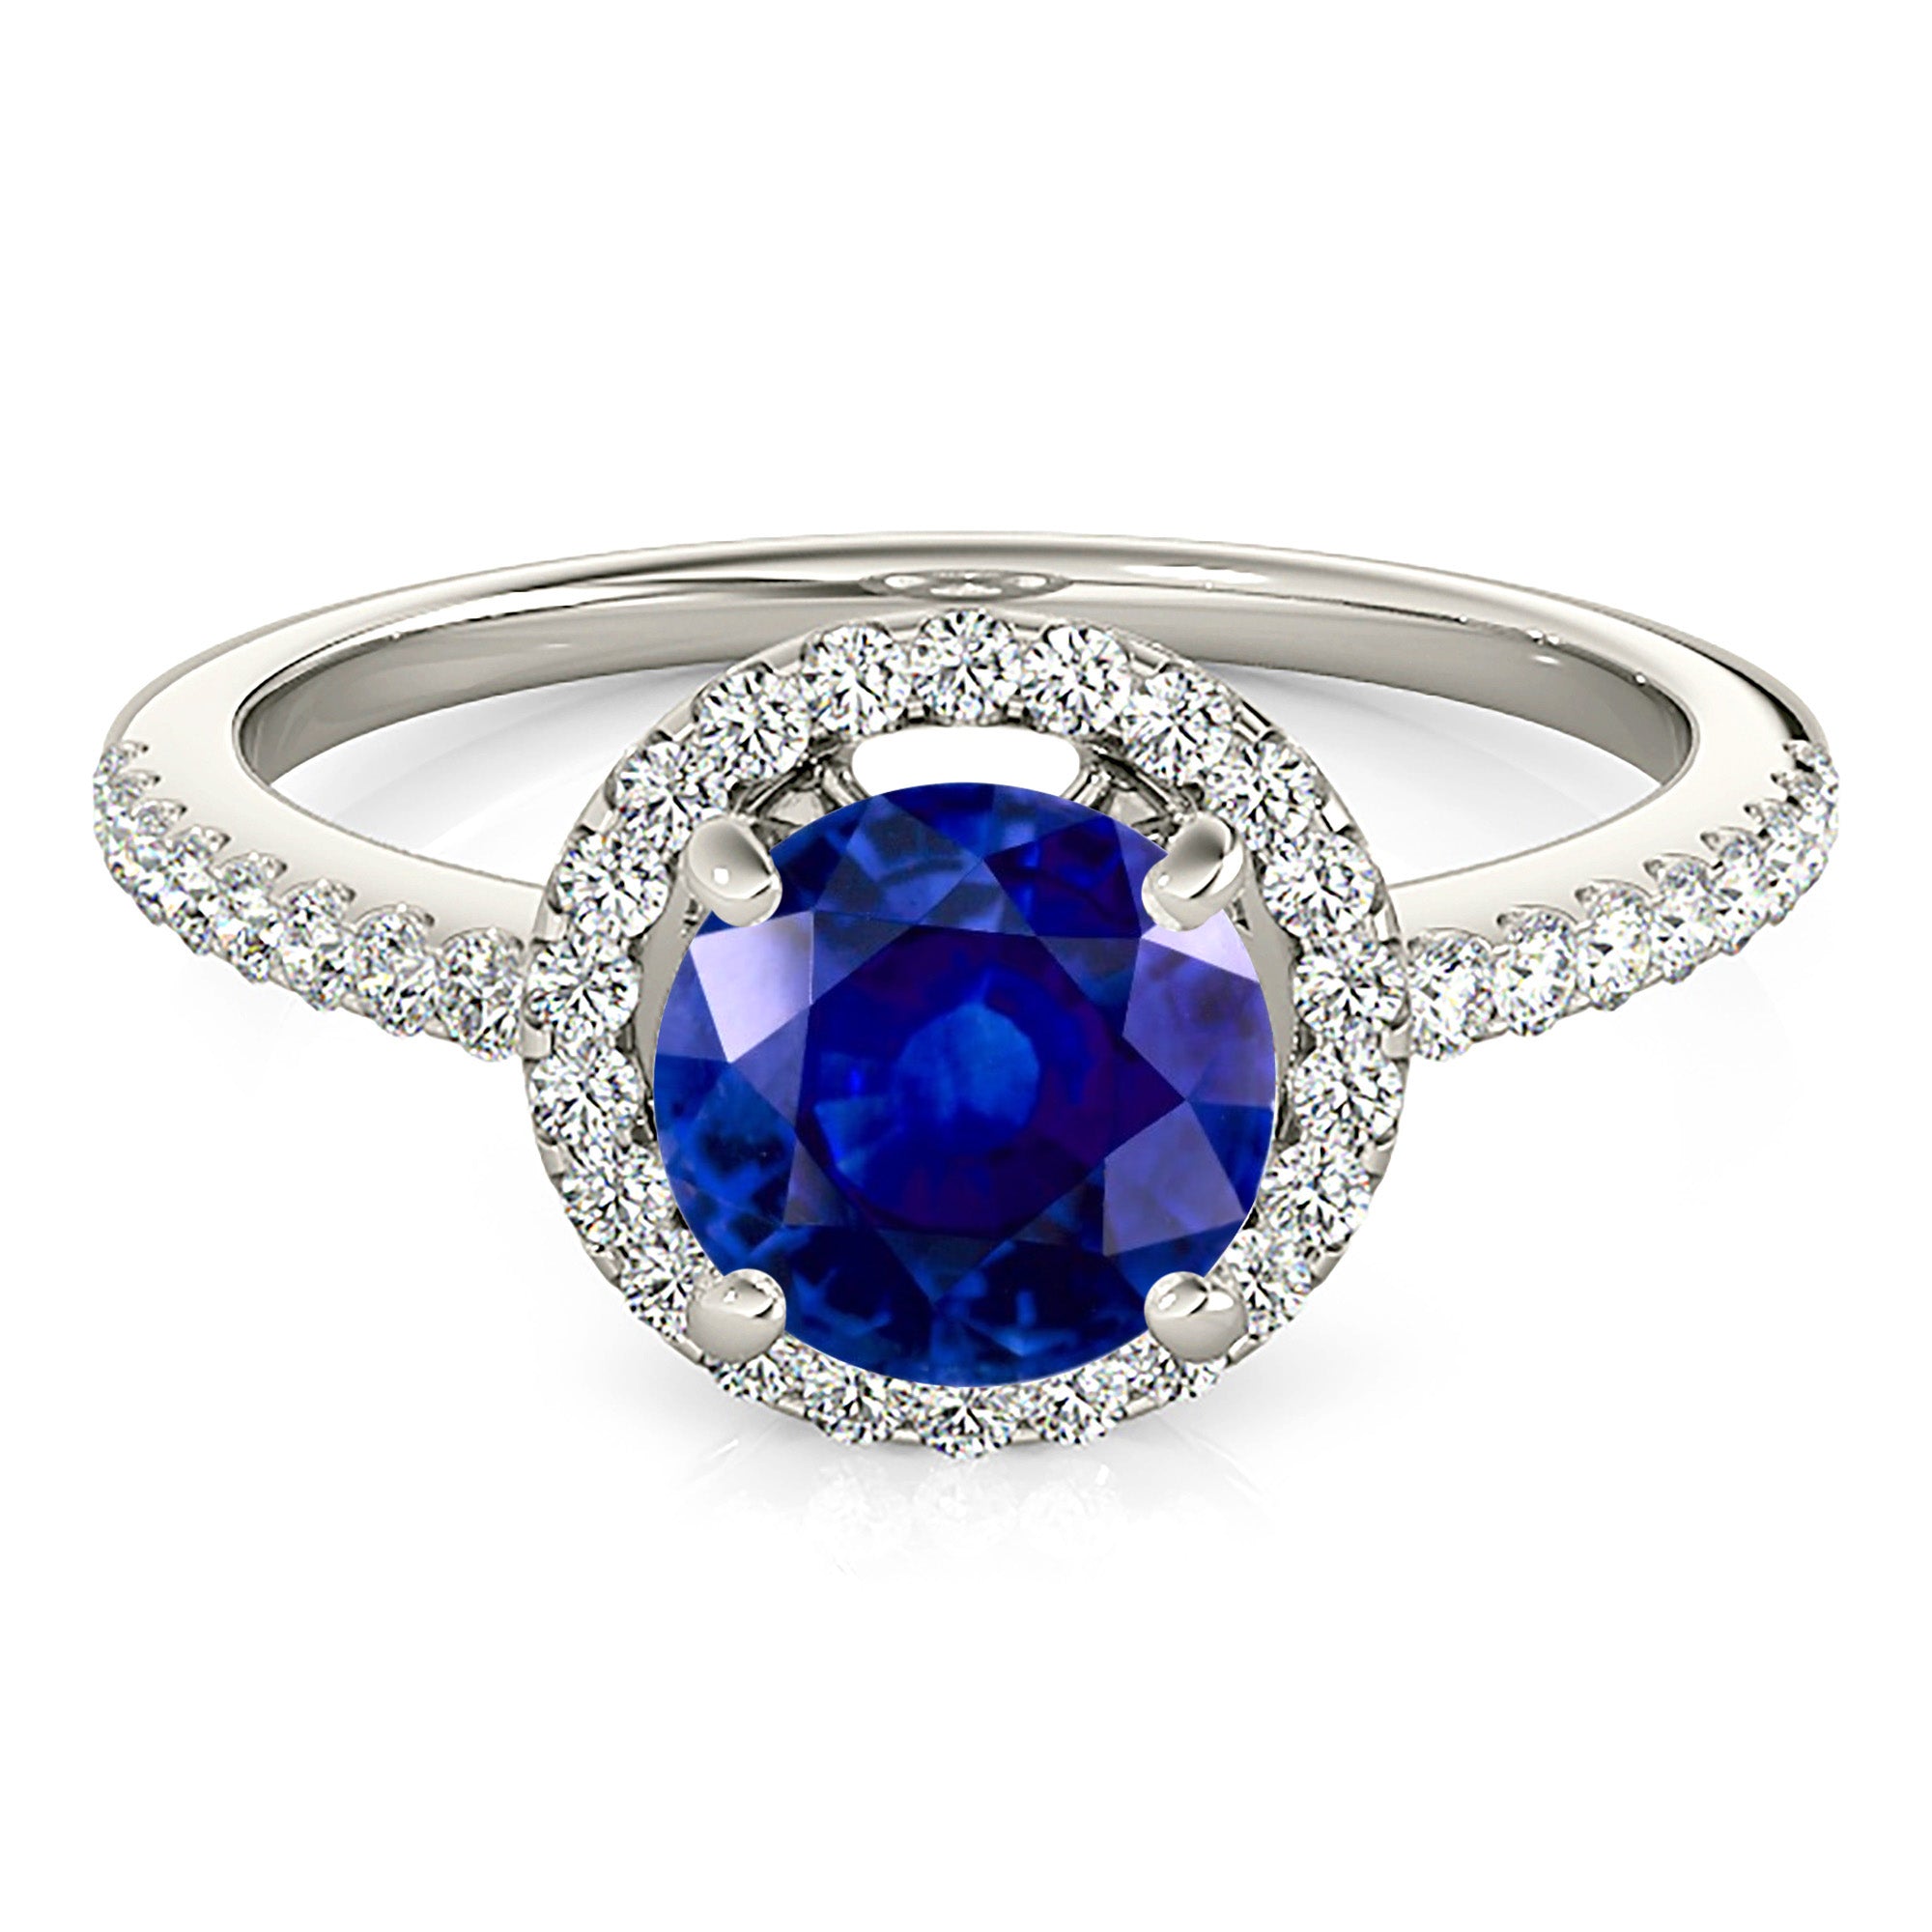 2.41 ct. Genuine Blue Sapphire Four Prong Halo Ring with 0.35 ctw. Side Diamonds-in 14K/18K White, Yellow, Rose Gold and Platinum - Christmas Jewelry Gift -VIRABYANI